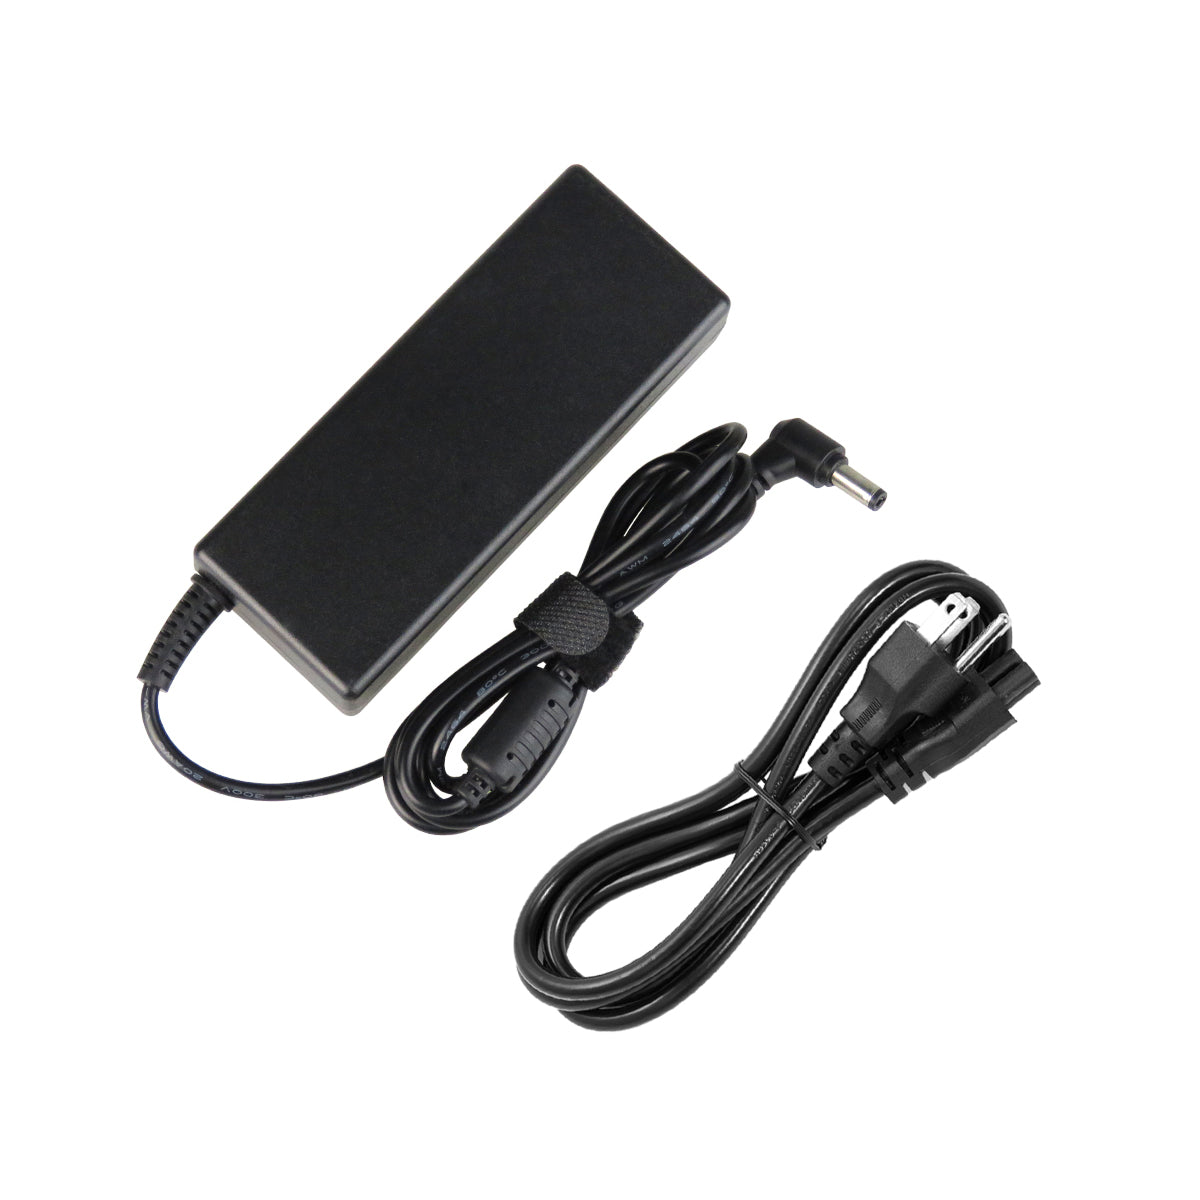 AC Adapter Charger for ASUS X88Se Notebook.